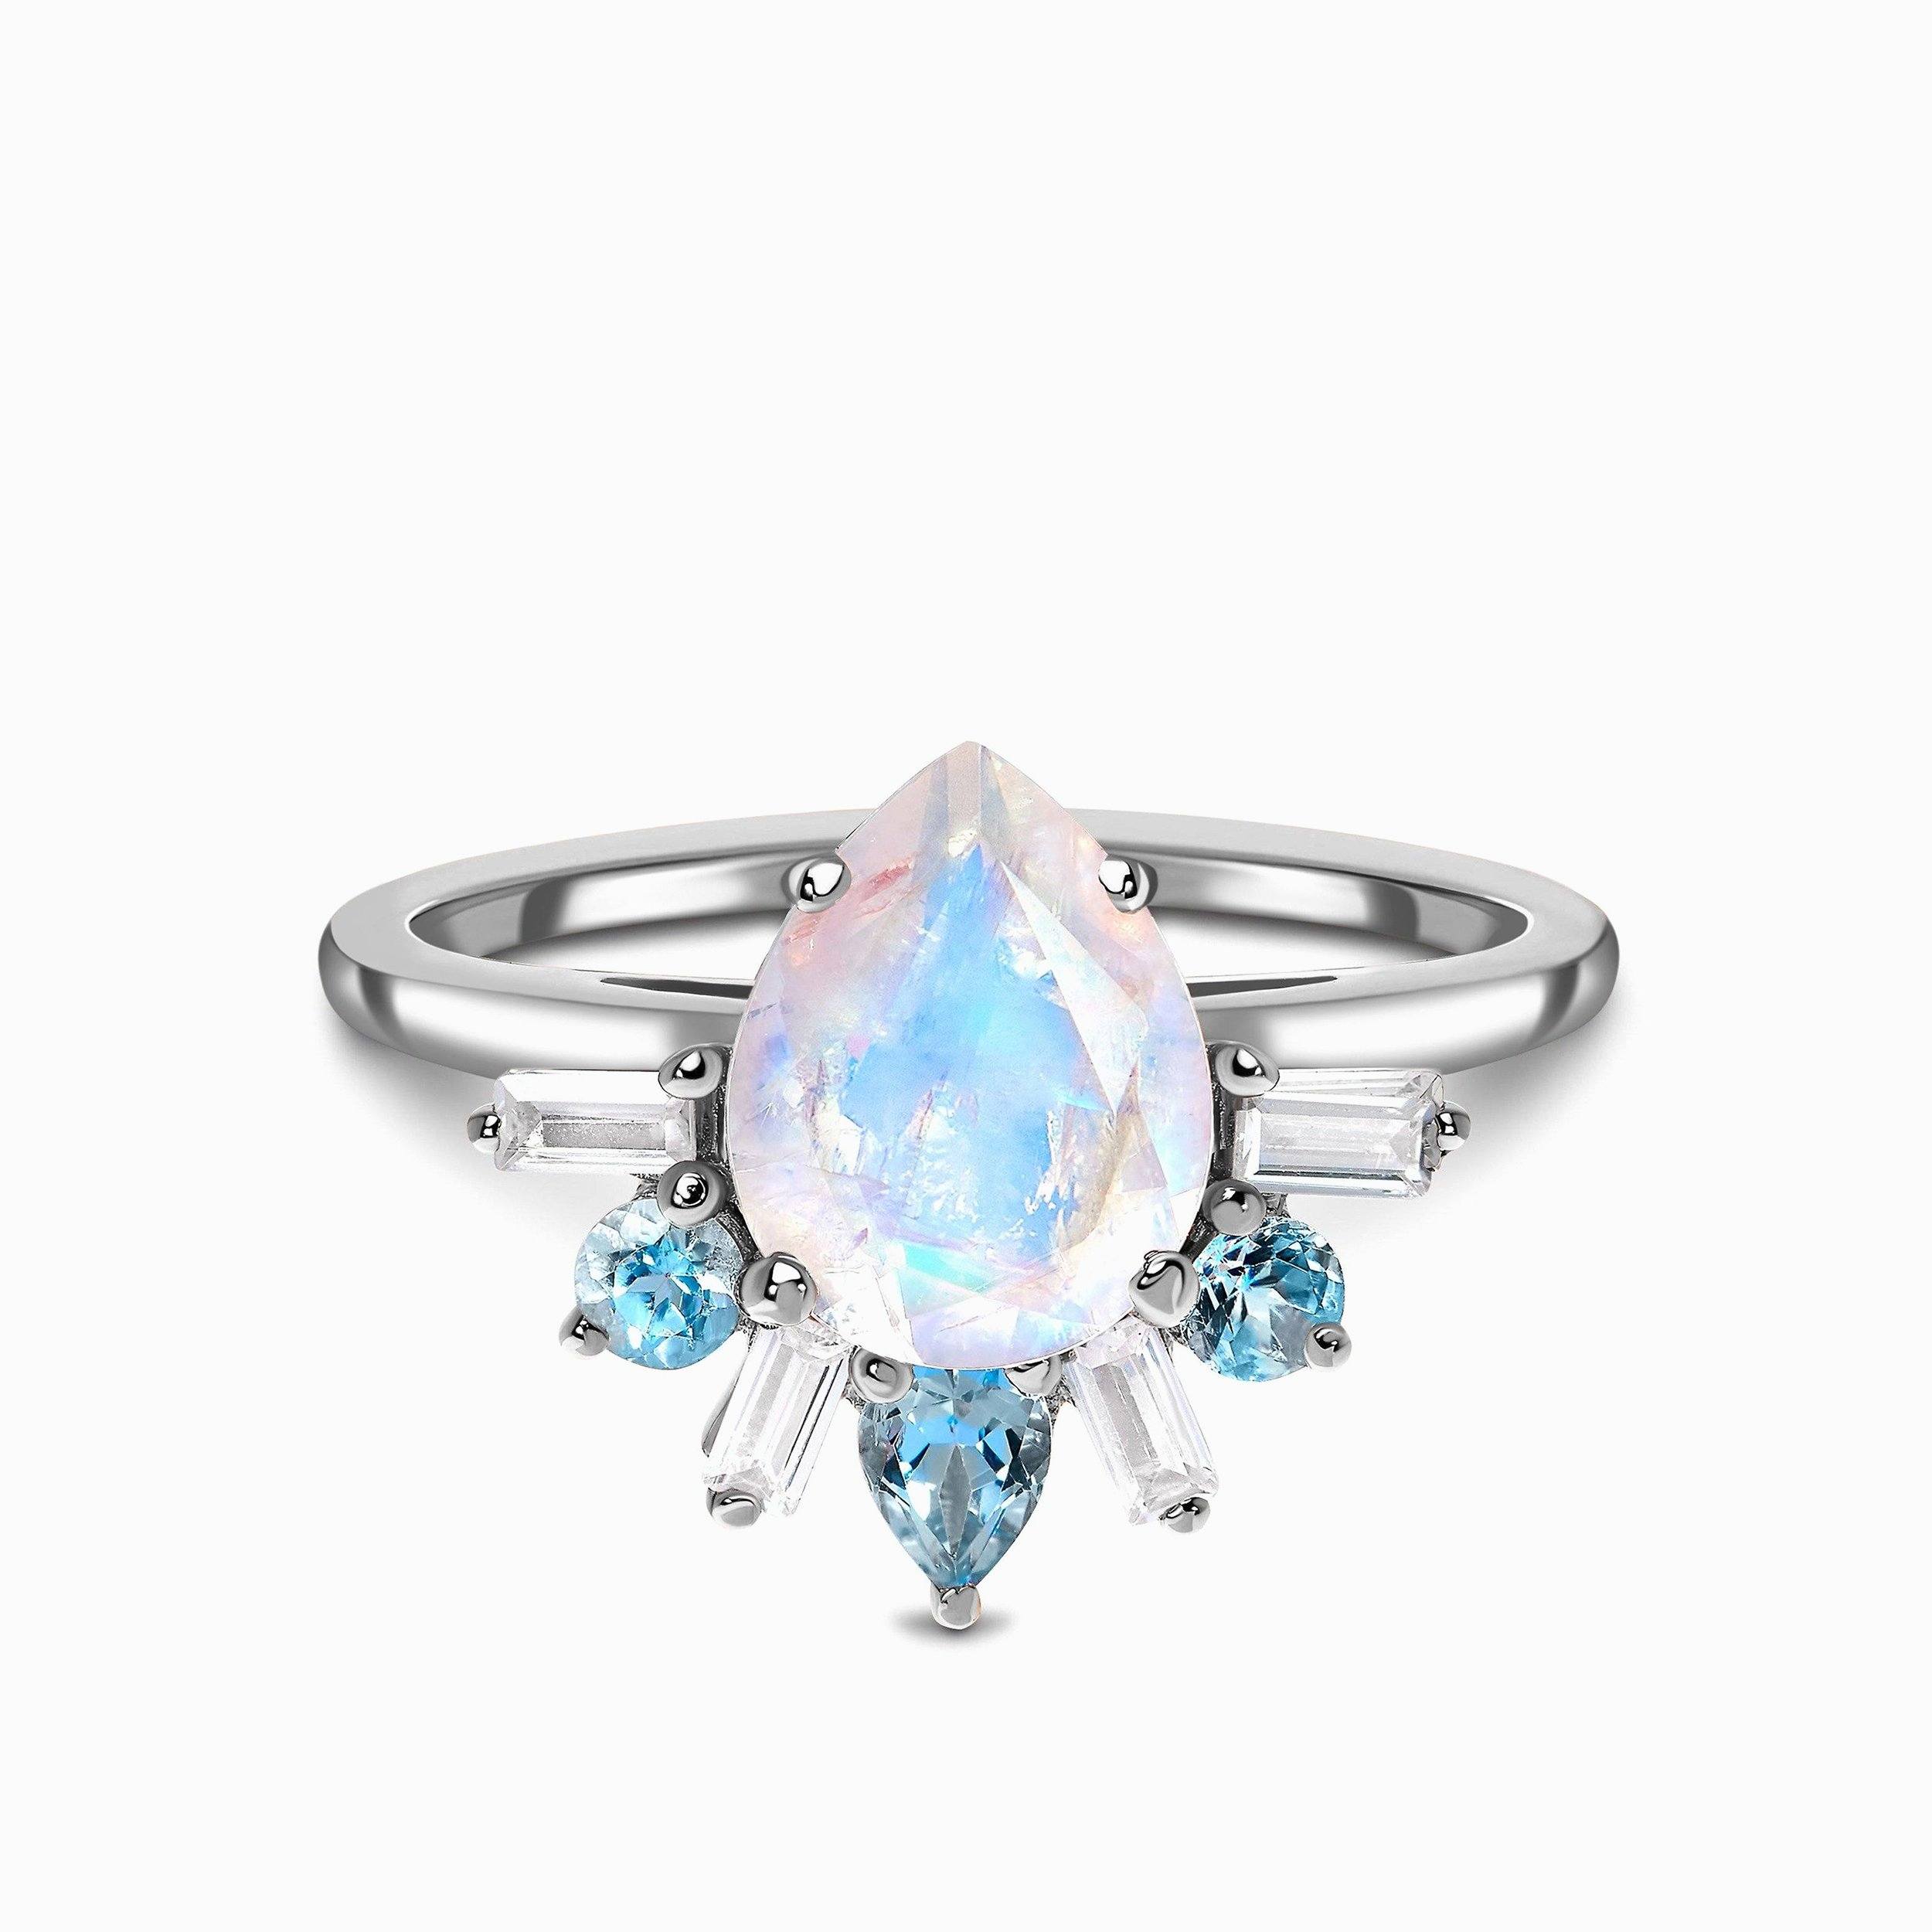 Blue Simulated Opal Upside Down Heart Ring Sterling Silver Size 10, Women's